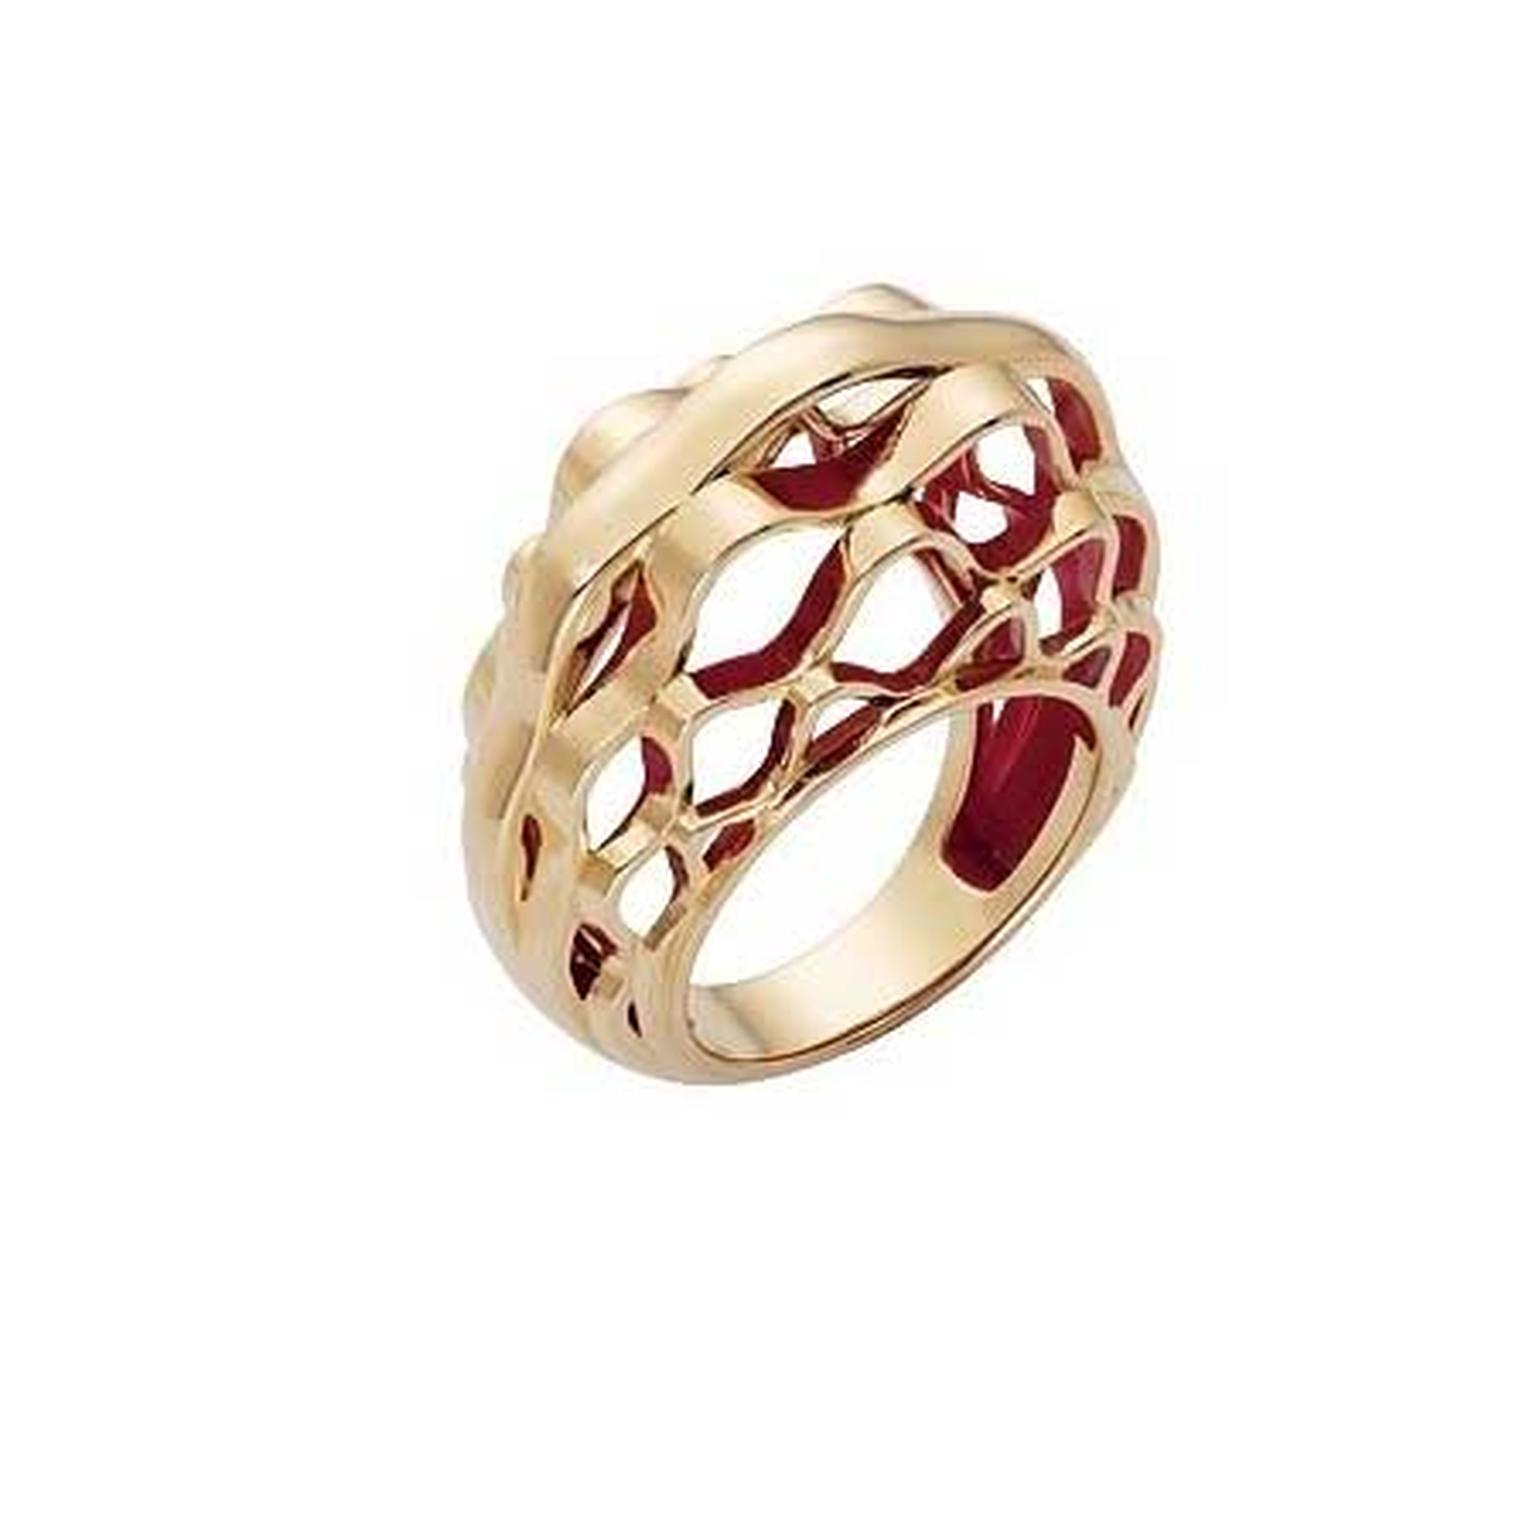 The glass dome of the Grand Palais is reflected in this architectural Cartier Paris Nouvelle Vague ring in yellow gold.